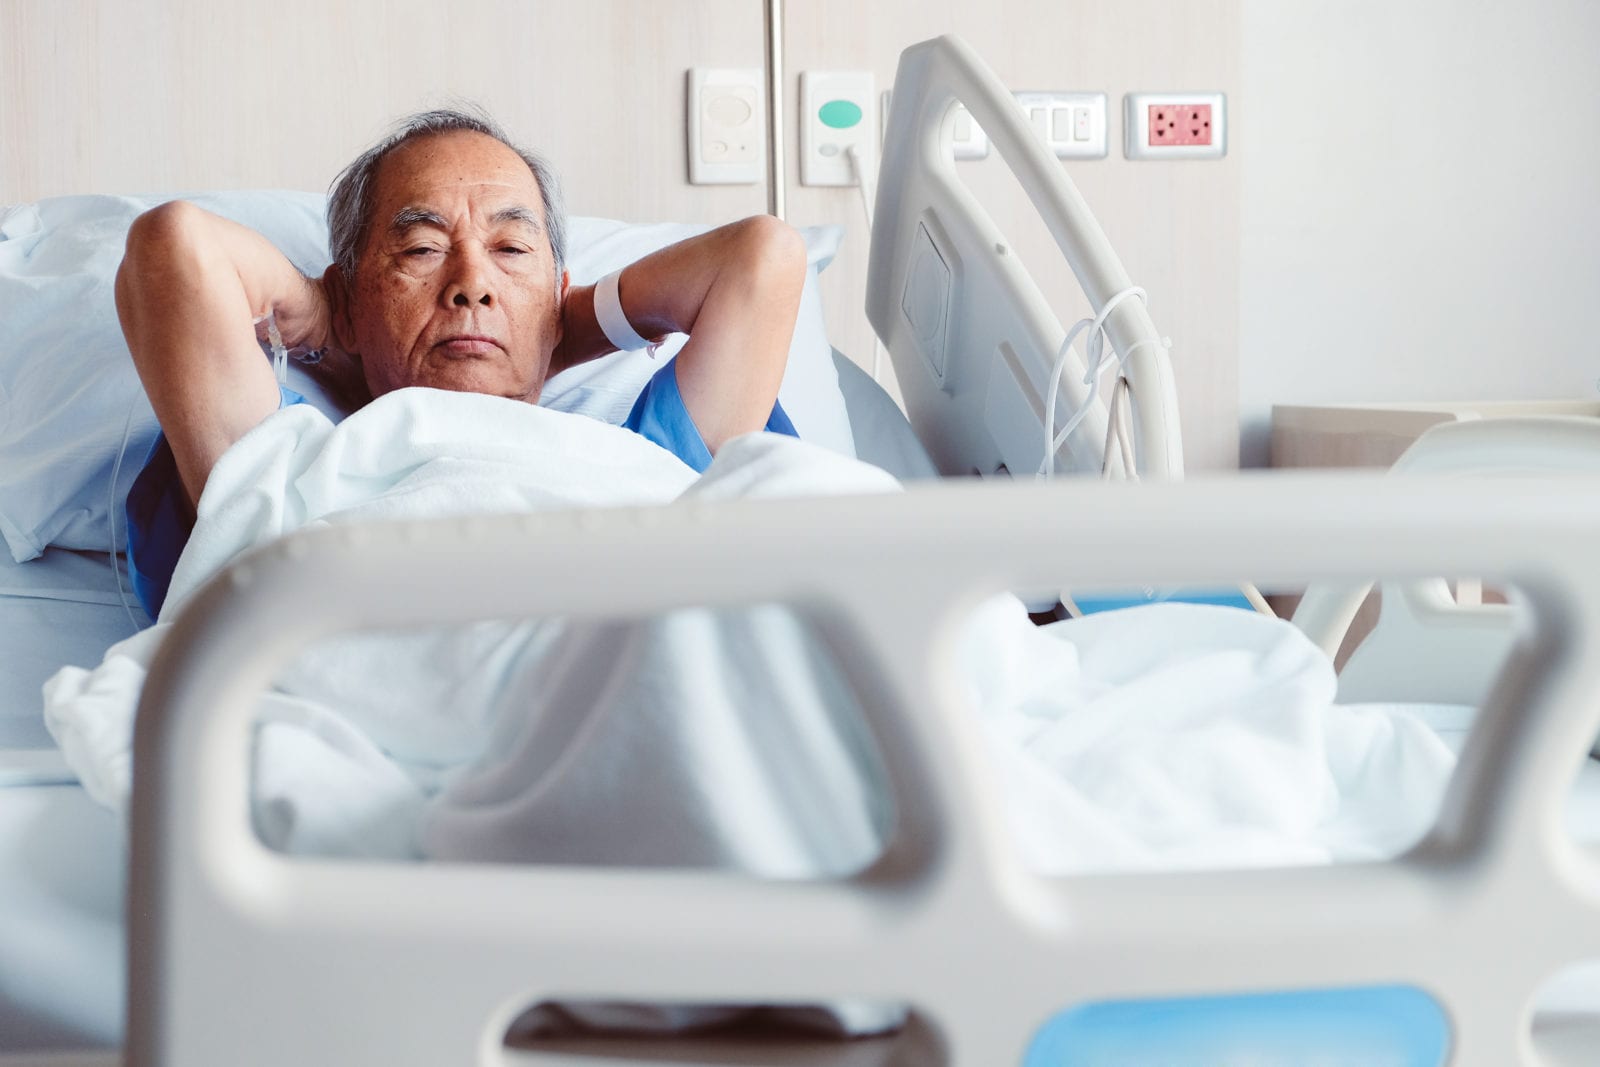 Does Medicare Cover Hospital Beds?